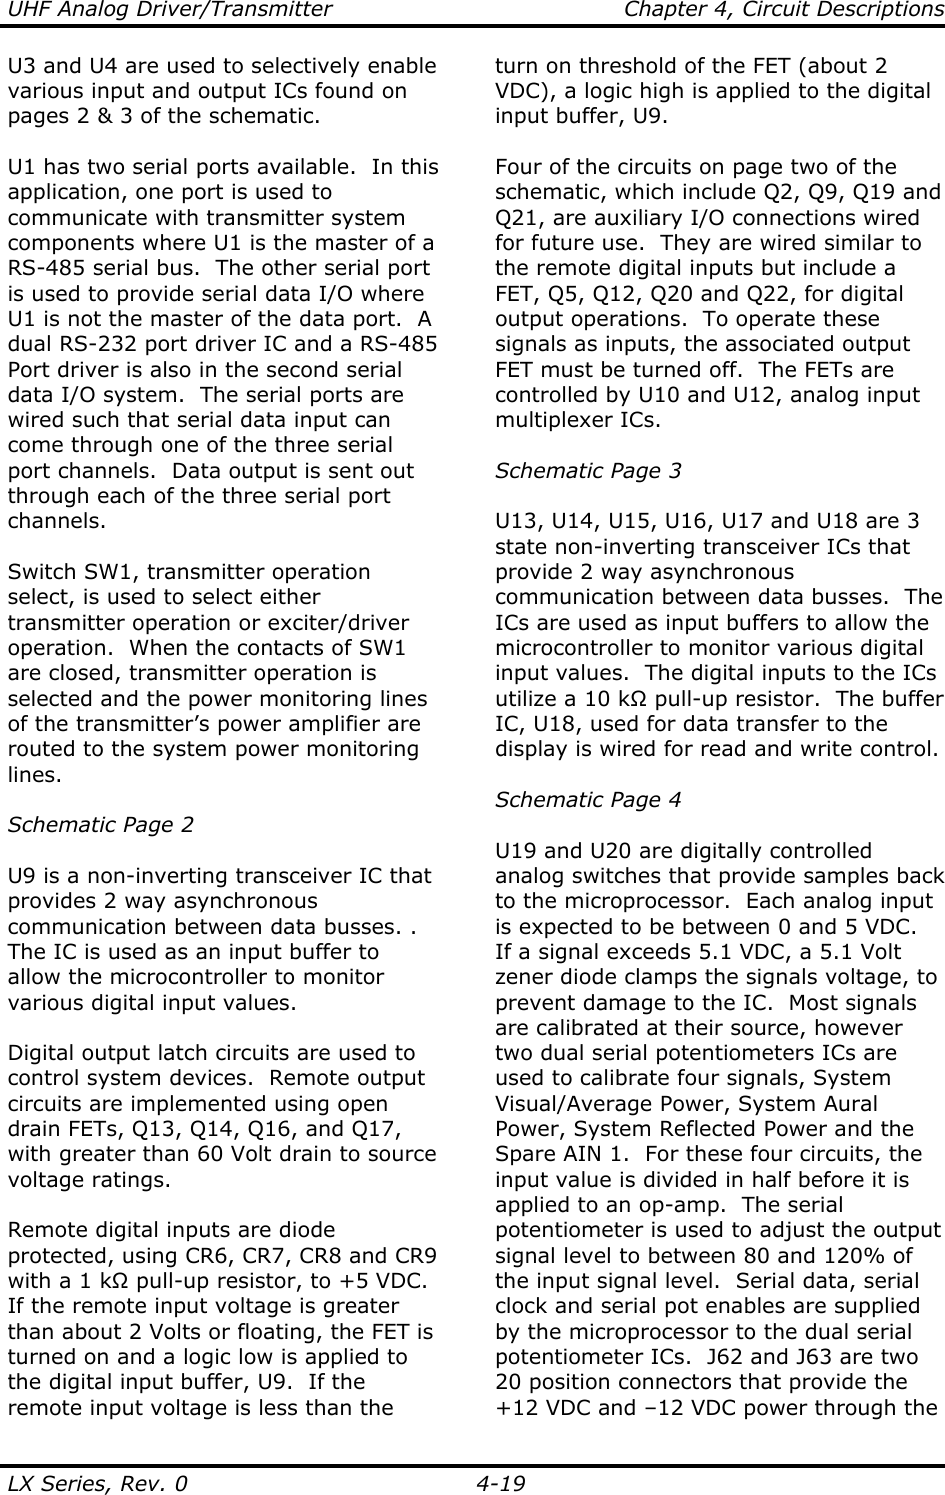 UHF Analog Driver/Transmitter    Chapter 4, Circuit Descriptions LX Series, Rev. 0    4-19 U3 and U4 are used to selectively enable various input and output ICs found on pages 2 &amp; 3 of the schematic.  U1 has two serial ports available.  In this application, one port is used to communicate with transmitter system components where U1 is the master of a RS-485 serial bus.  The other serial port is used to provide serial data I/O where U1 is not the master of the data port.  A dual RS-232 port driver IC and a RS-485 Port driver is also in the second serial data I/O system.  The serial ports are wired such that serial data input can come through one of the three serial port channels.  Data output is sent out through each of the three serial port channels.  Switch SW1, transmitter operation select, is used to select either transmitter operation or exciter/driver operation.  When the contacts of SW1 are closed, transmitter operation is selected and the power monitoring lines of the transmitter’s power amplifier are routed to the system power monitoring lines.  Schematic Page 2  U9 is a non-inverting transceiver IC that provides 2 way asynchronous communication between data busses. .  The IC is used as an input buffer to allow the microcontroller to monitor various digital input values.  Digital output latch circuits are used to control system devices.  Remote output circuits are implemented using open drain FETs, Q13, Q14, Q16, and Q17, with greater than 60 Volt drain to source voltage ratings.  Remote digital inputs are diode protected, using CR6, CR7, CR8 and CR9 with a 1 kΩ pull-up resistor, to +5 VDC.  If the remote input voltage is greater than about 2 Volts or floating, the FET is turned on and a logic low is applied to the digital input buffer, U9.  If the remote input voltage is less than the turn on threshold of the FET (about 2 VDC), a logic high is applied to the digital input buffer, U9.  Four of the circuits on page two of the schematic, which include Q2, Q9, Q19 and Q21, are auxiliary I/O connections wired for future use.  They are wired similar to the remote digital inputs but include a FET, Q5, Q12, Q20 and Q22, for digital output operations.  To operate these signals as inputs, the associated output FET must be turned off.  The FETs are controlled by U10 and U12, analog input multiplexer ICs.  Schematic Page 3  U13, U14, U15, U16, U17 and U18 are 3 state non-inverting transceiver ICs that provide 2 way asynchronous communication between data busses.  The ICs are used as input buffers to allow the microcontroller to monitor various digital input values.  The digital inputs to the ICs utilize a 10 kΩ pull-up resistor.  The buffer IC, U18, used for data transfer to the display is wired for read and write control.  Schematic Page 4  U19 and U20 are digitally controlled analog switches that provide samples back to the microprocessor.  Each analog input is expected to be between 0 and 5 VDC.  If a signal exceeds 5.1 VDC, a 5.1 Volt zener diode clamps the signals voltage, to prevent damage to the IC.  Most signals are calibrated at their source, however two dual serial potentiometers ICs are used to calibrate four signals, System Visual/Average Power, System Aural Power, System Reflected Power and the Spare AIN 1.  For these four circuits, the input value is divided in half before it is applied to an op-amp.  The serial potentiometer is used to adjust the output signal level to between 80 and 120% of the input signal level.  Serial data, serial clock and serial pot enables are supplied by the microprocessor to the dual serial potentiometer ICs.  J62 and J63 are two 20 position connectors that provide the +12 VDC and –12 VDC power through the 